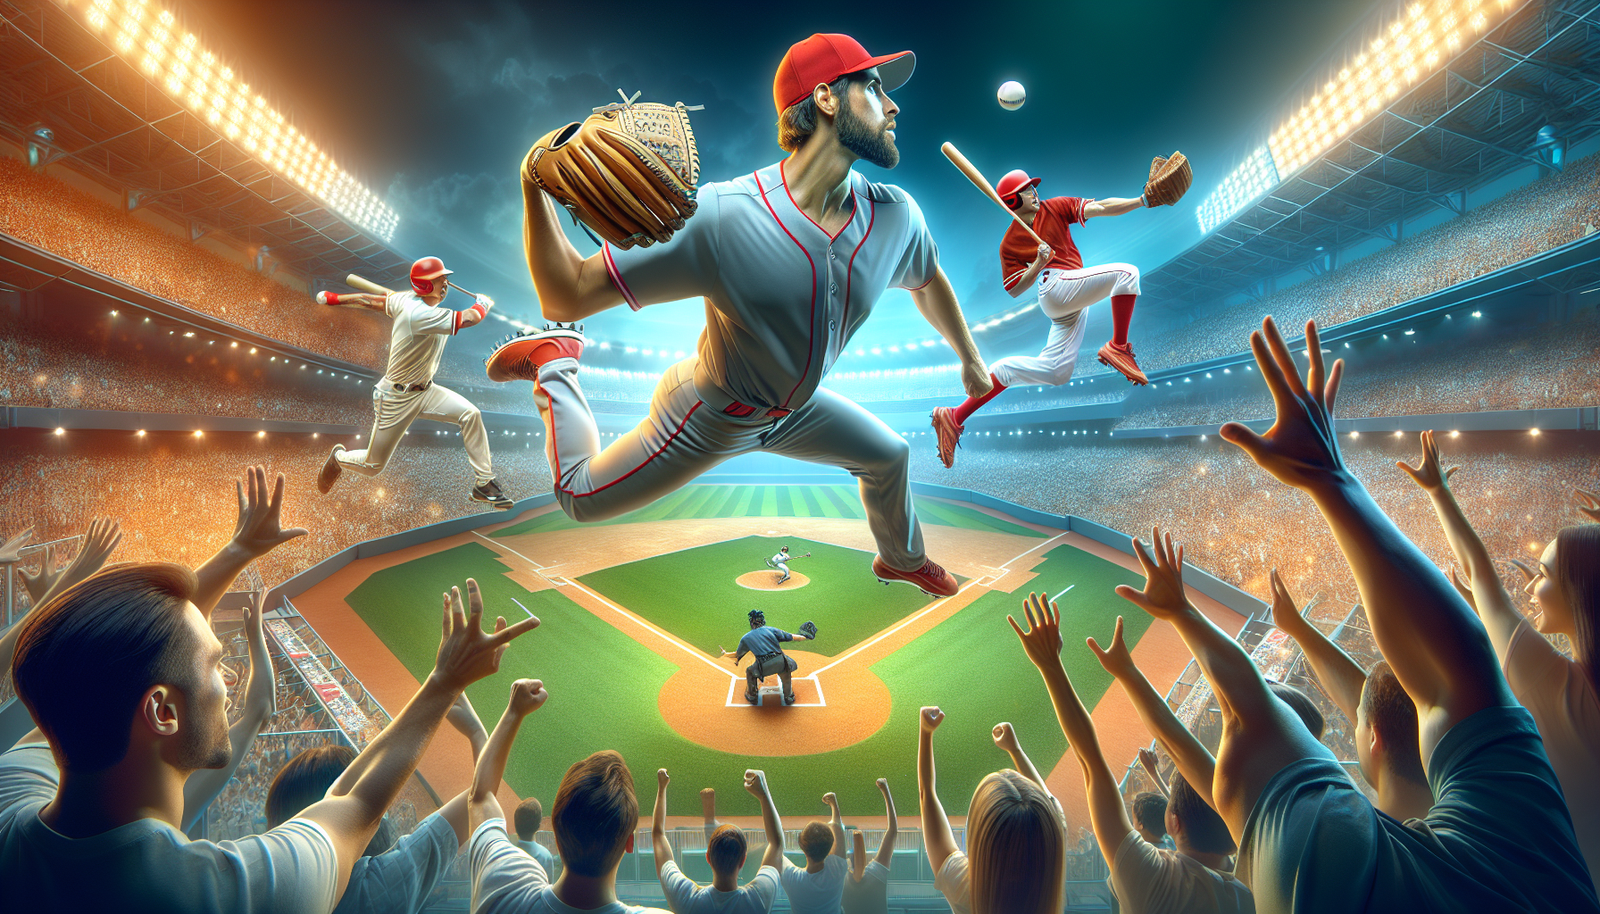 EA SPORTS MLB TAP BASEBALL 23:Amazon.com:Appstore for Android